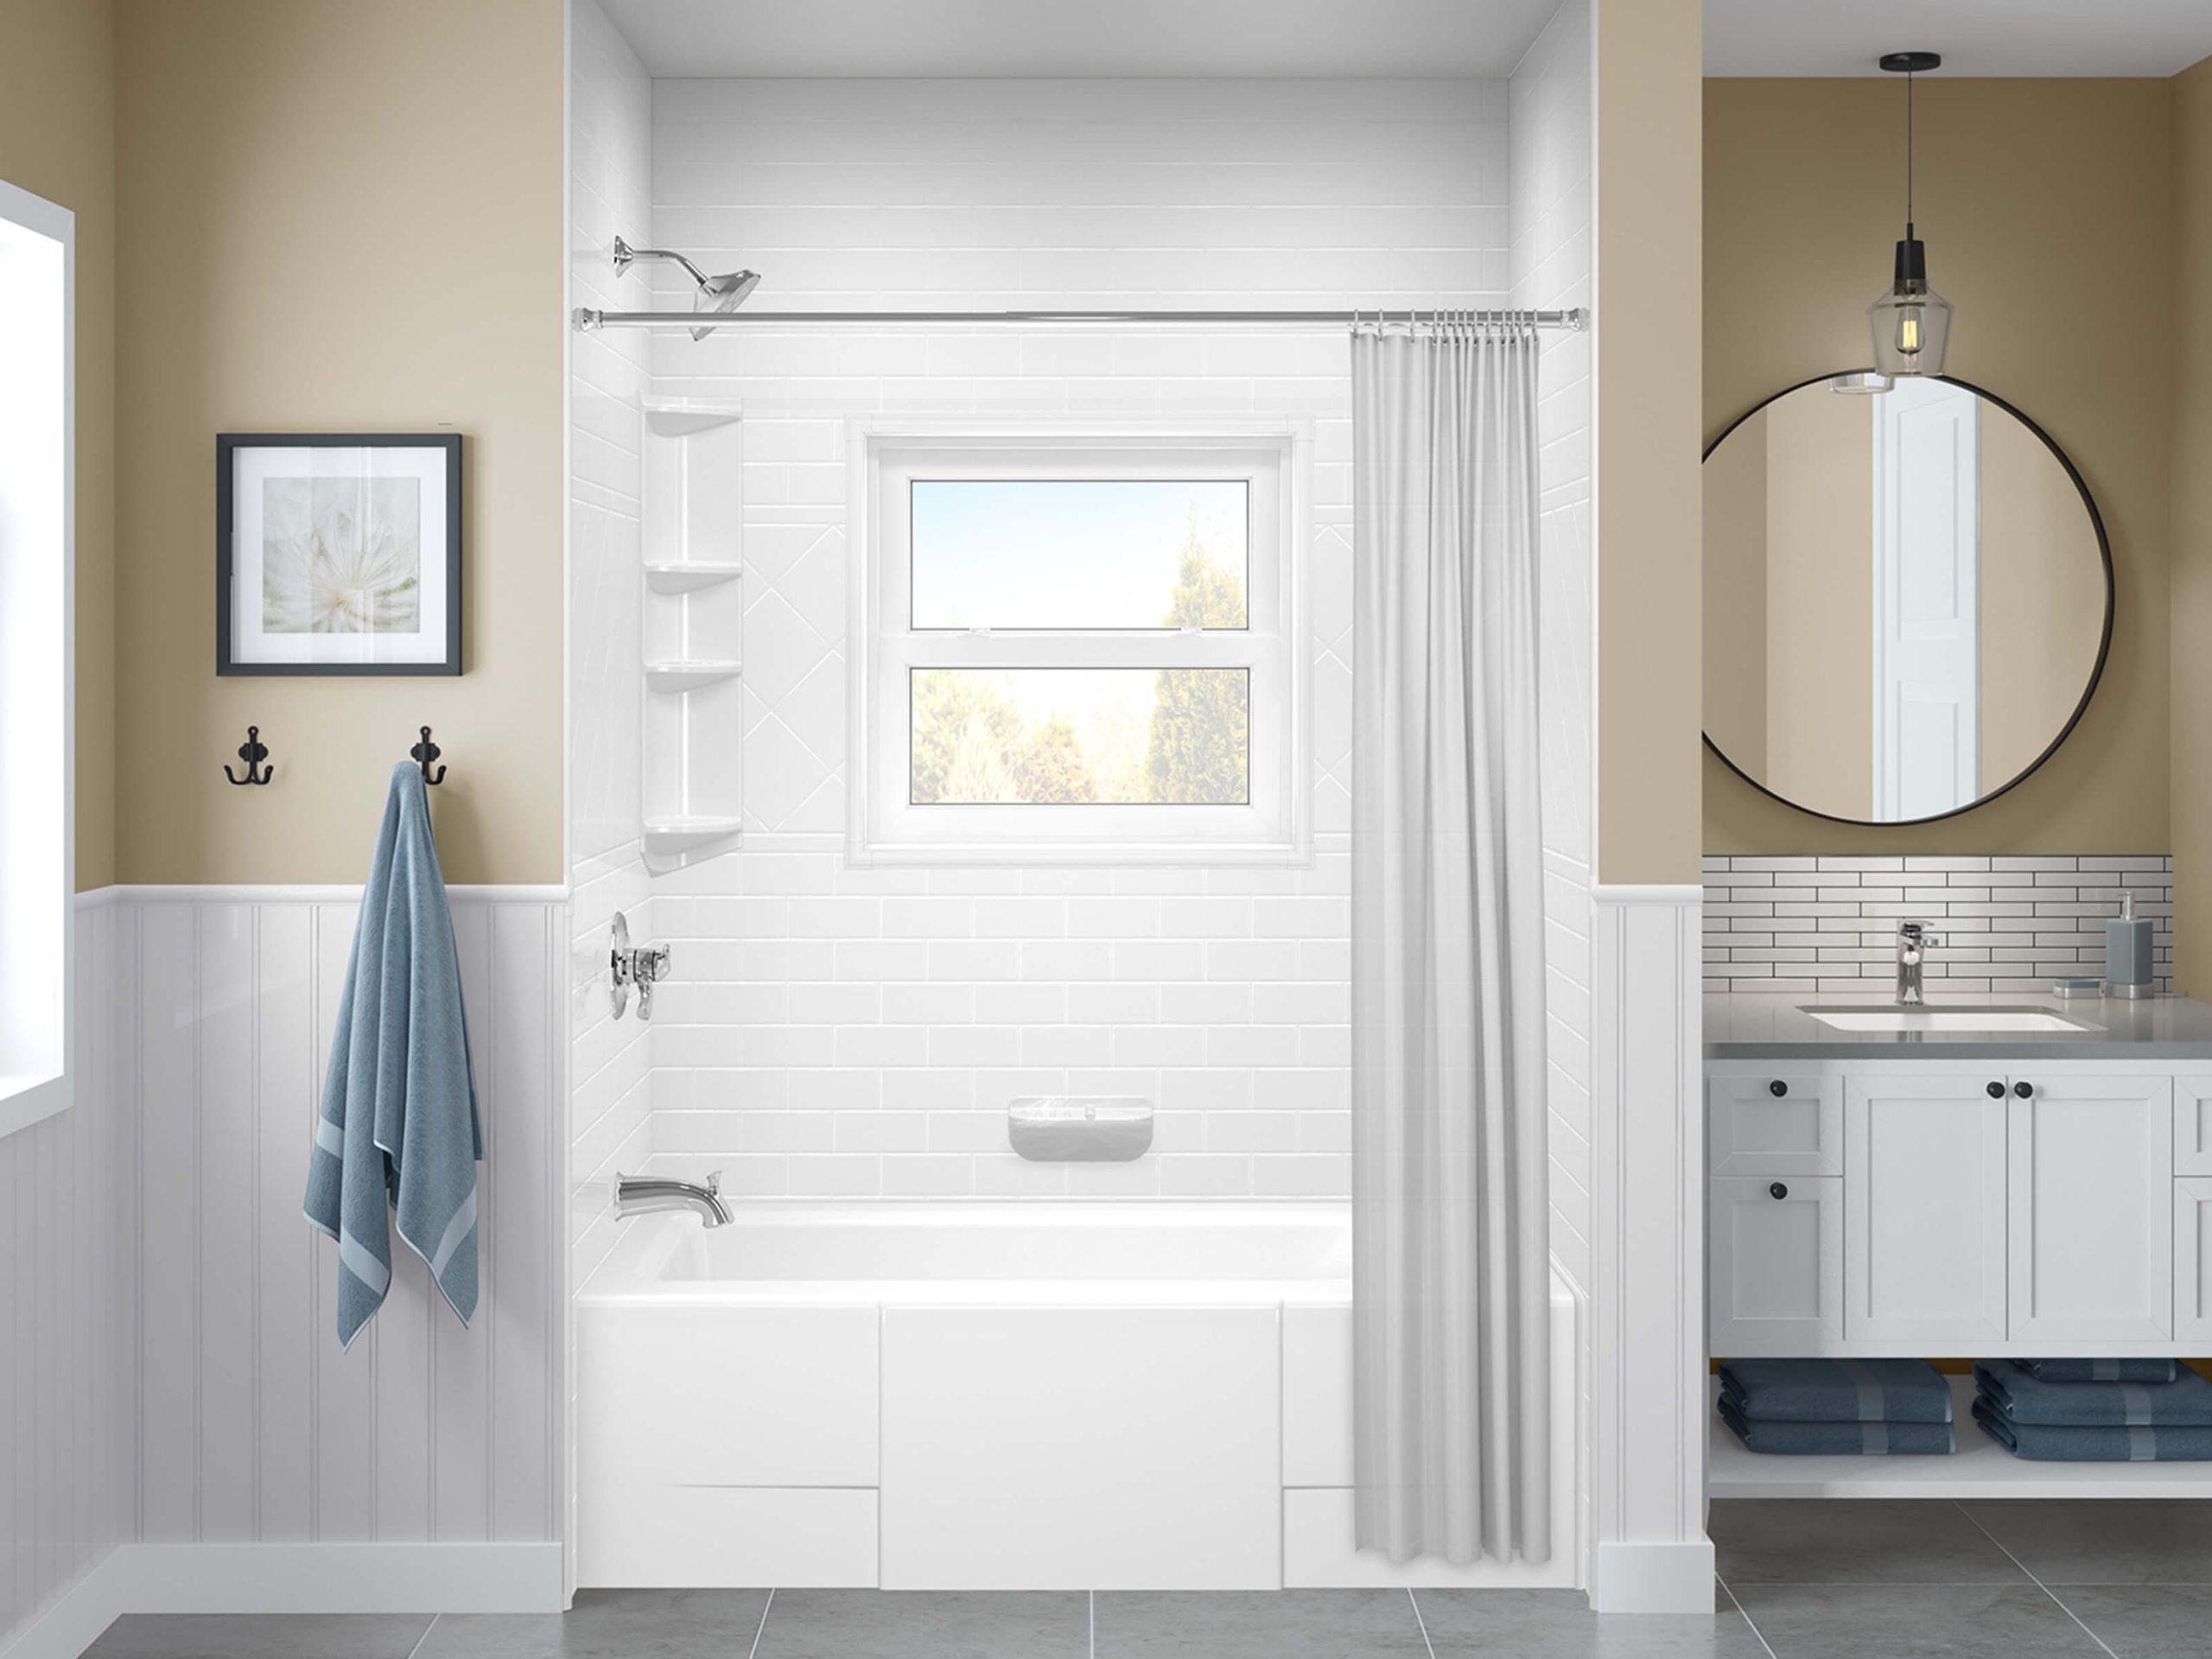 Mouldings For Bathroom Bath Fitter, How To Install Bathtub Wall Surround With Window